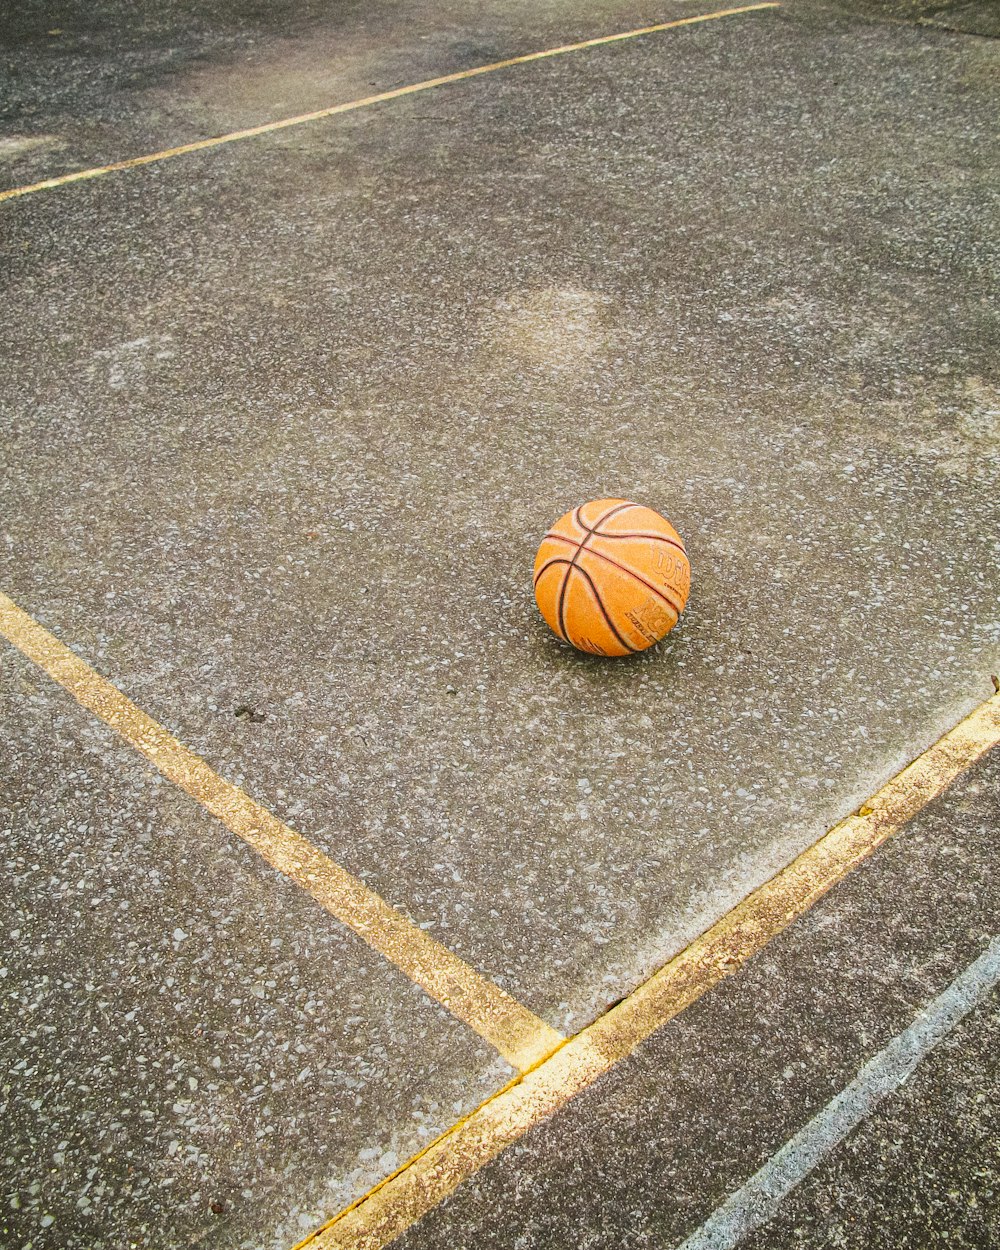 a basketball sitting on the ground in a parking lot